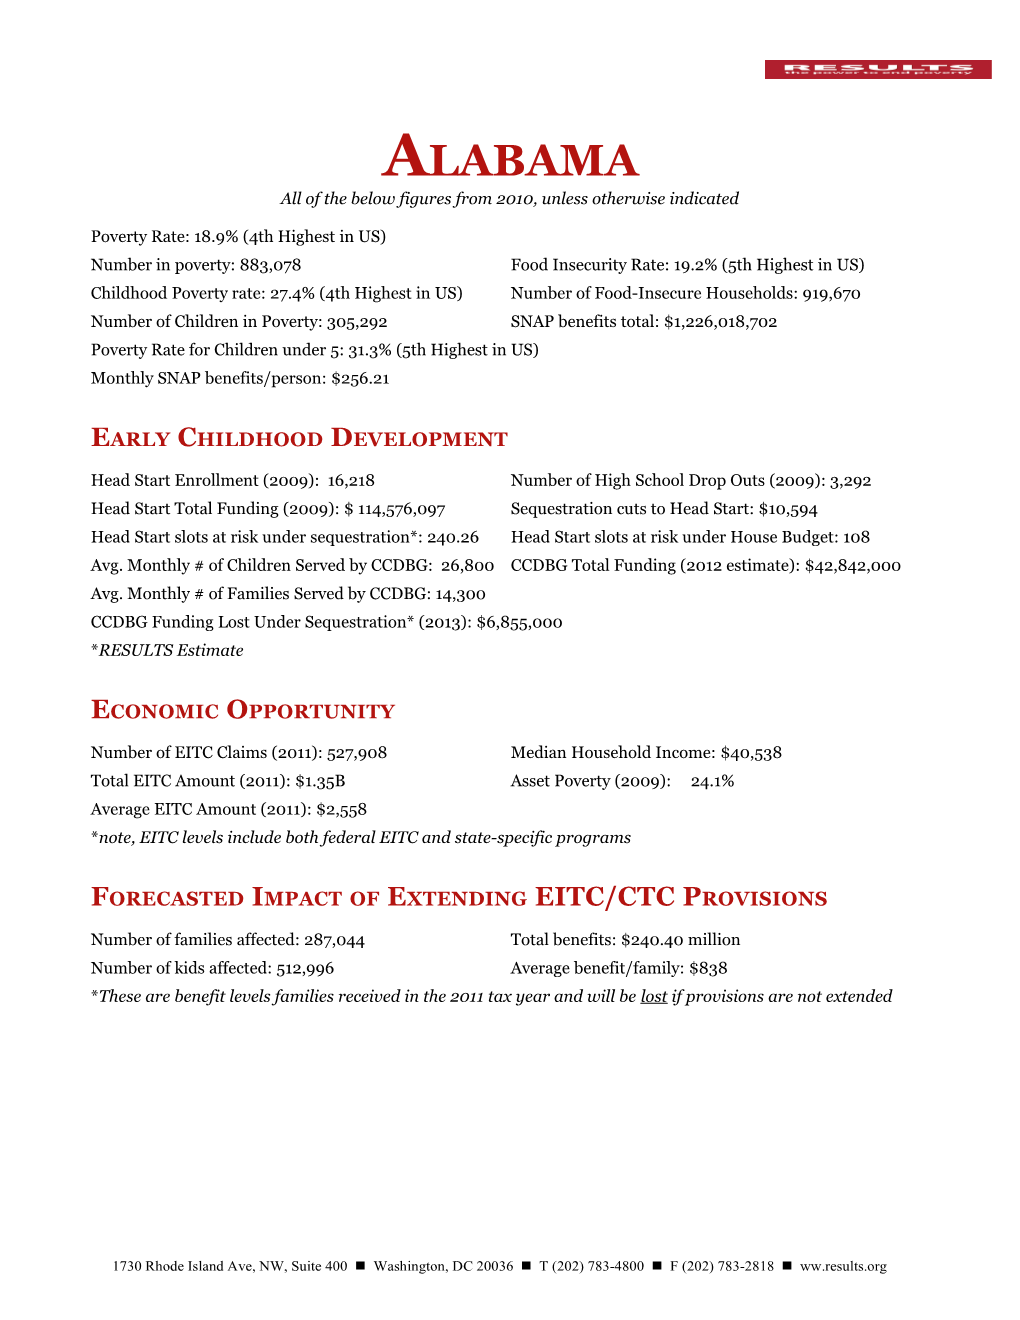 Alabama All of the Below Figures from 2010, Unless Otherwise Indicated